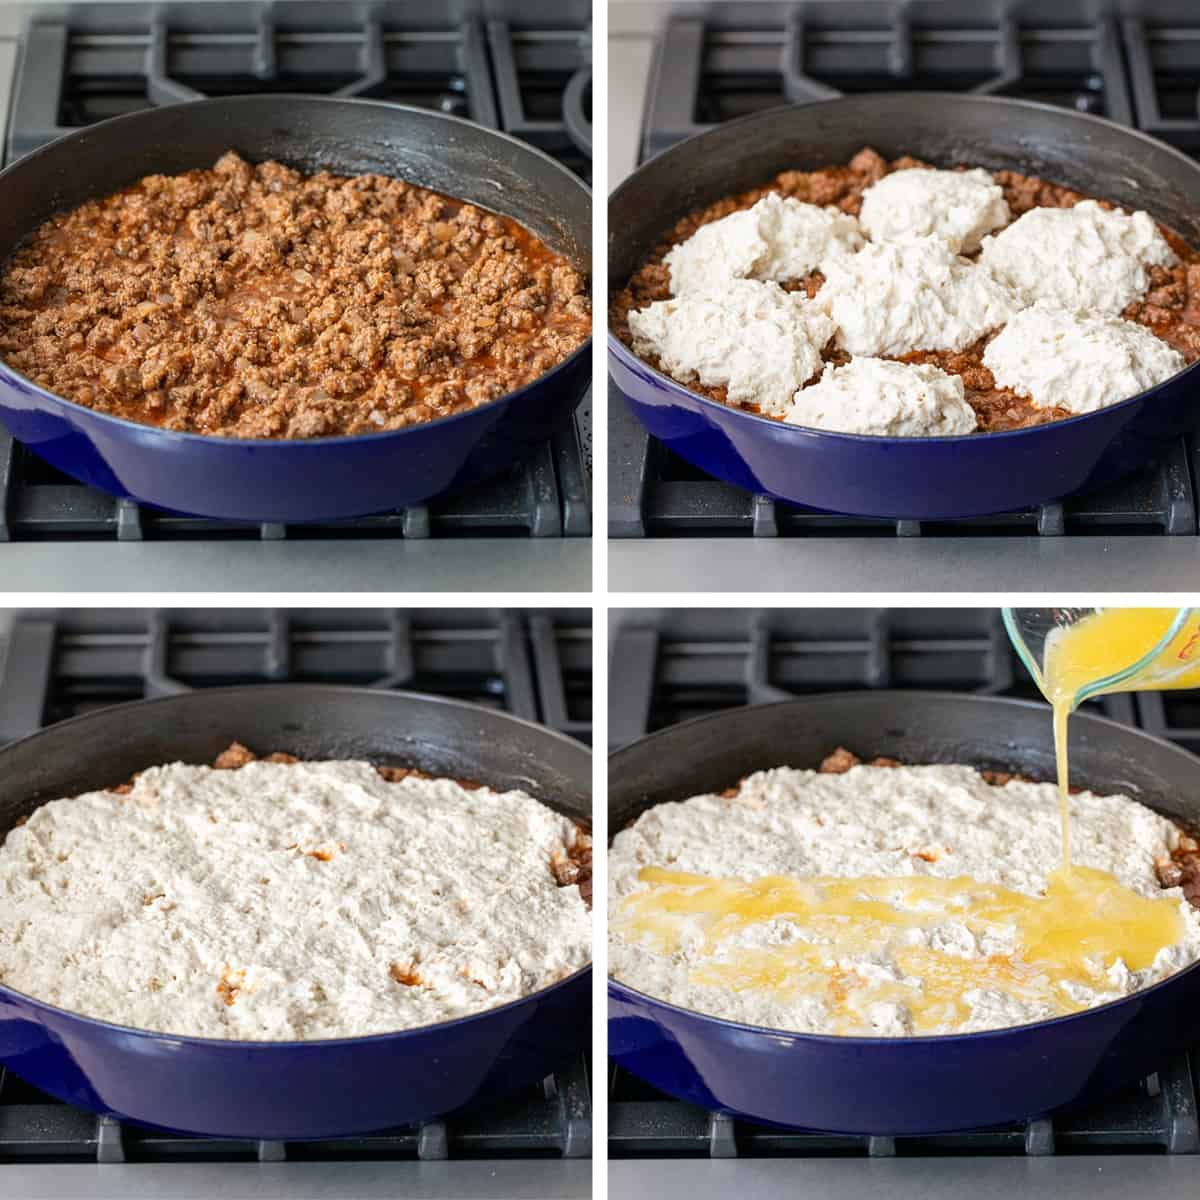 Steps for Making Butter Swim Biscuit Sloppy Joe Bake in a Skillet on a Stove Top.